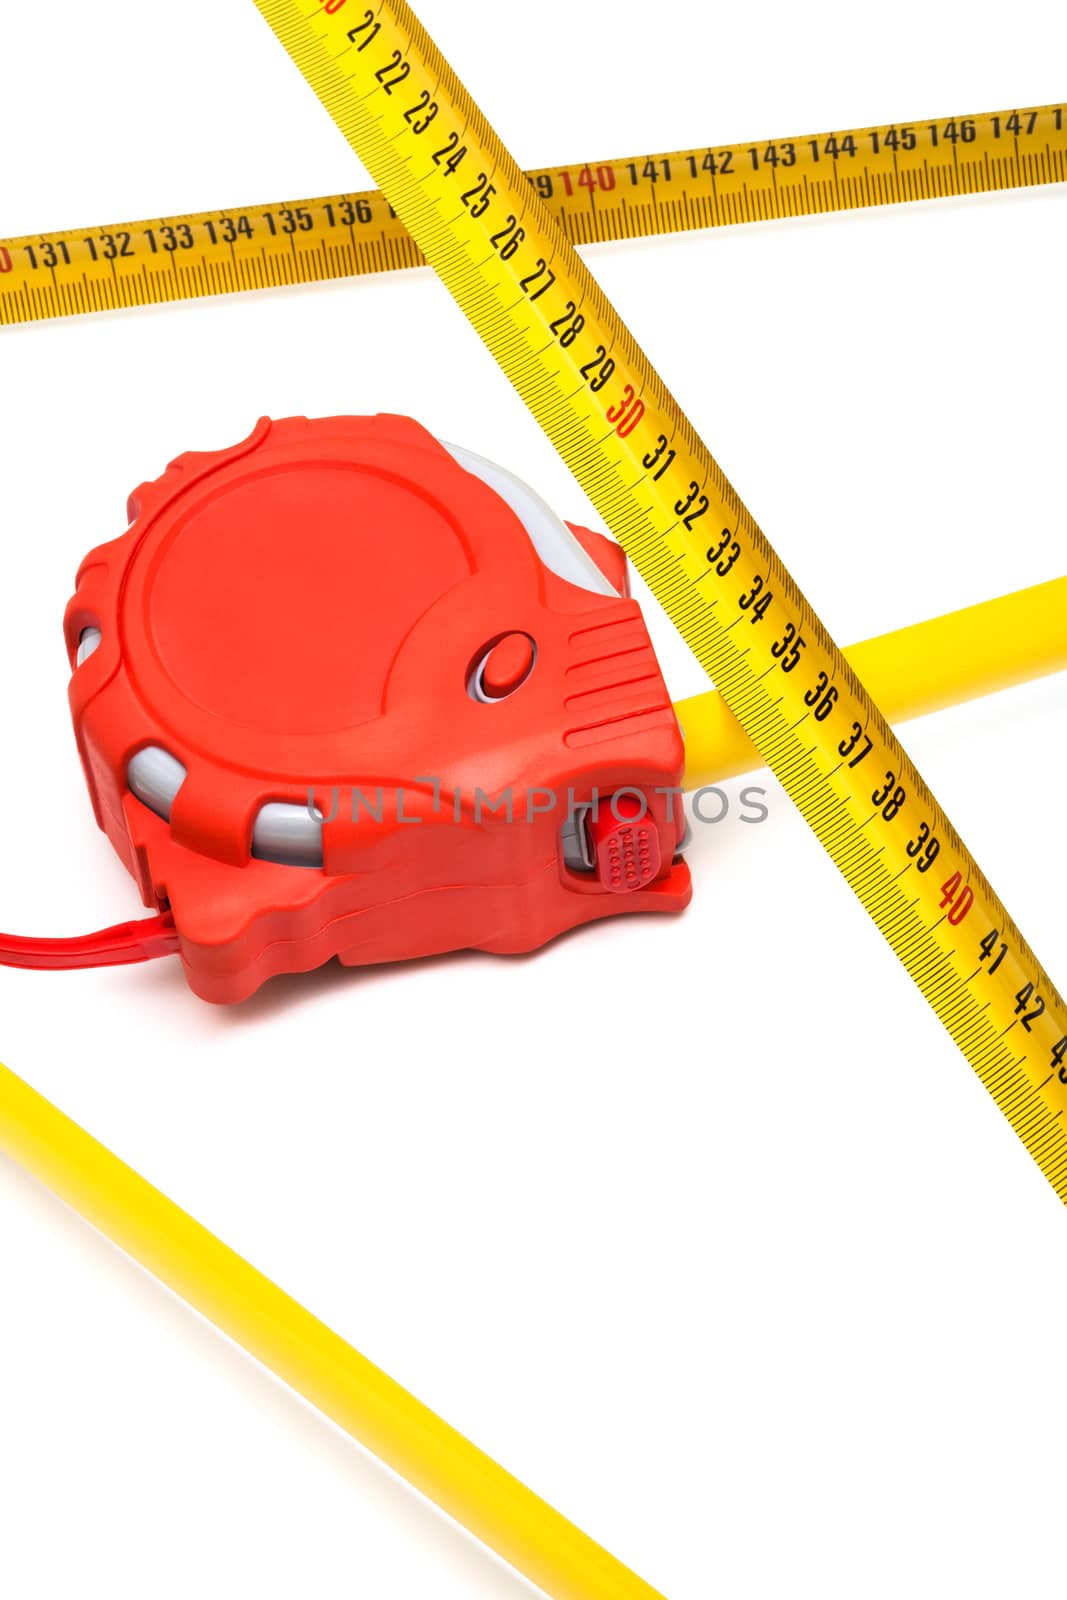 new tape-measure by terex